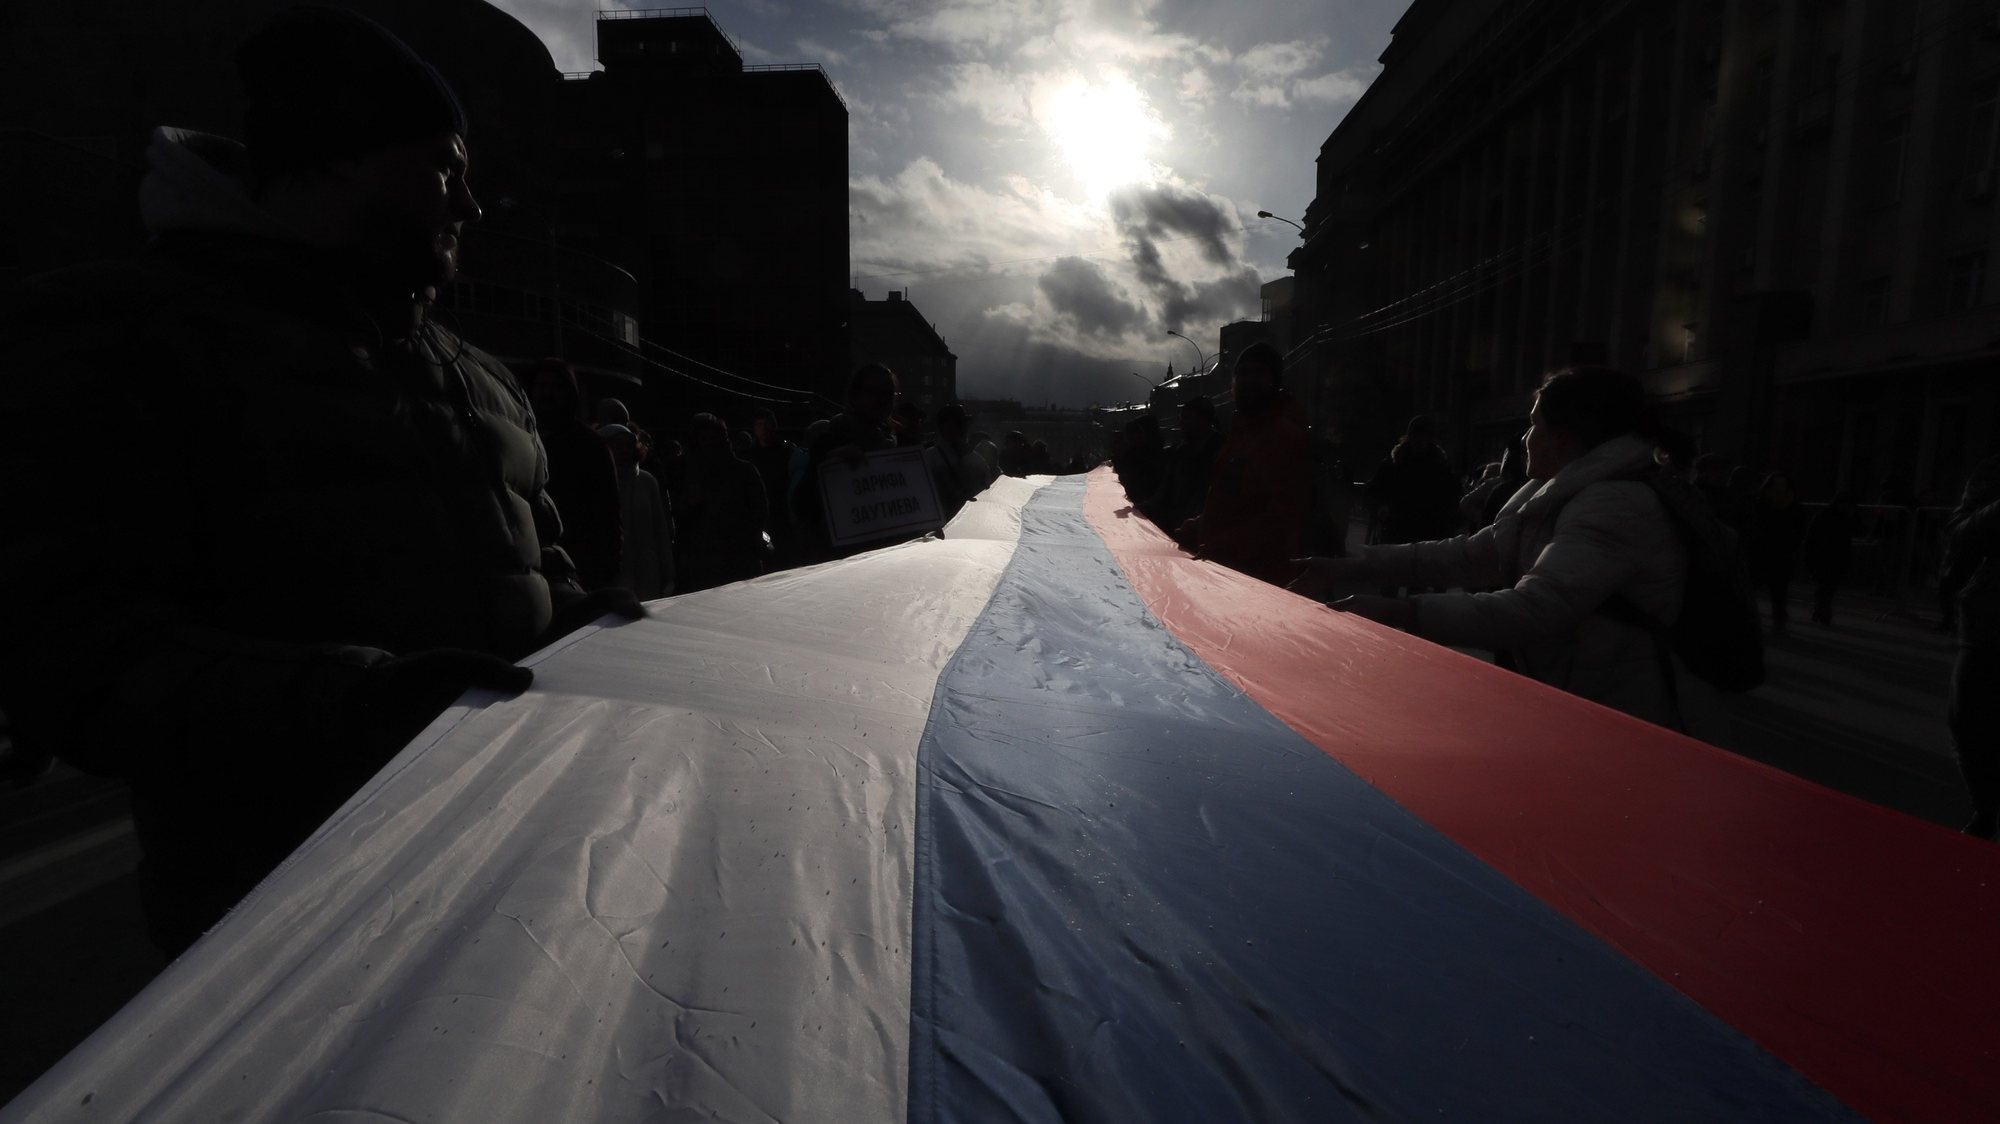 epa08258870 Opposition supporters holding a large Russian flag take part in a memorial march for Boris Nemtsov to mark the fifth anniversary of his assassination in Moscow, Russia, 29 February 2020. Nemtsov was a liberal politician and prominent critic of Russian President Vladimir Putin who was assassinated on 27 February 2015 in Moscow.  EPA/YURI KOCHETKOV